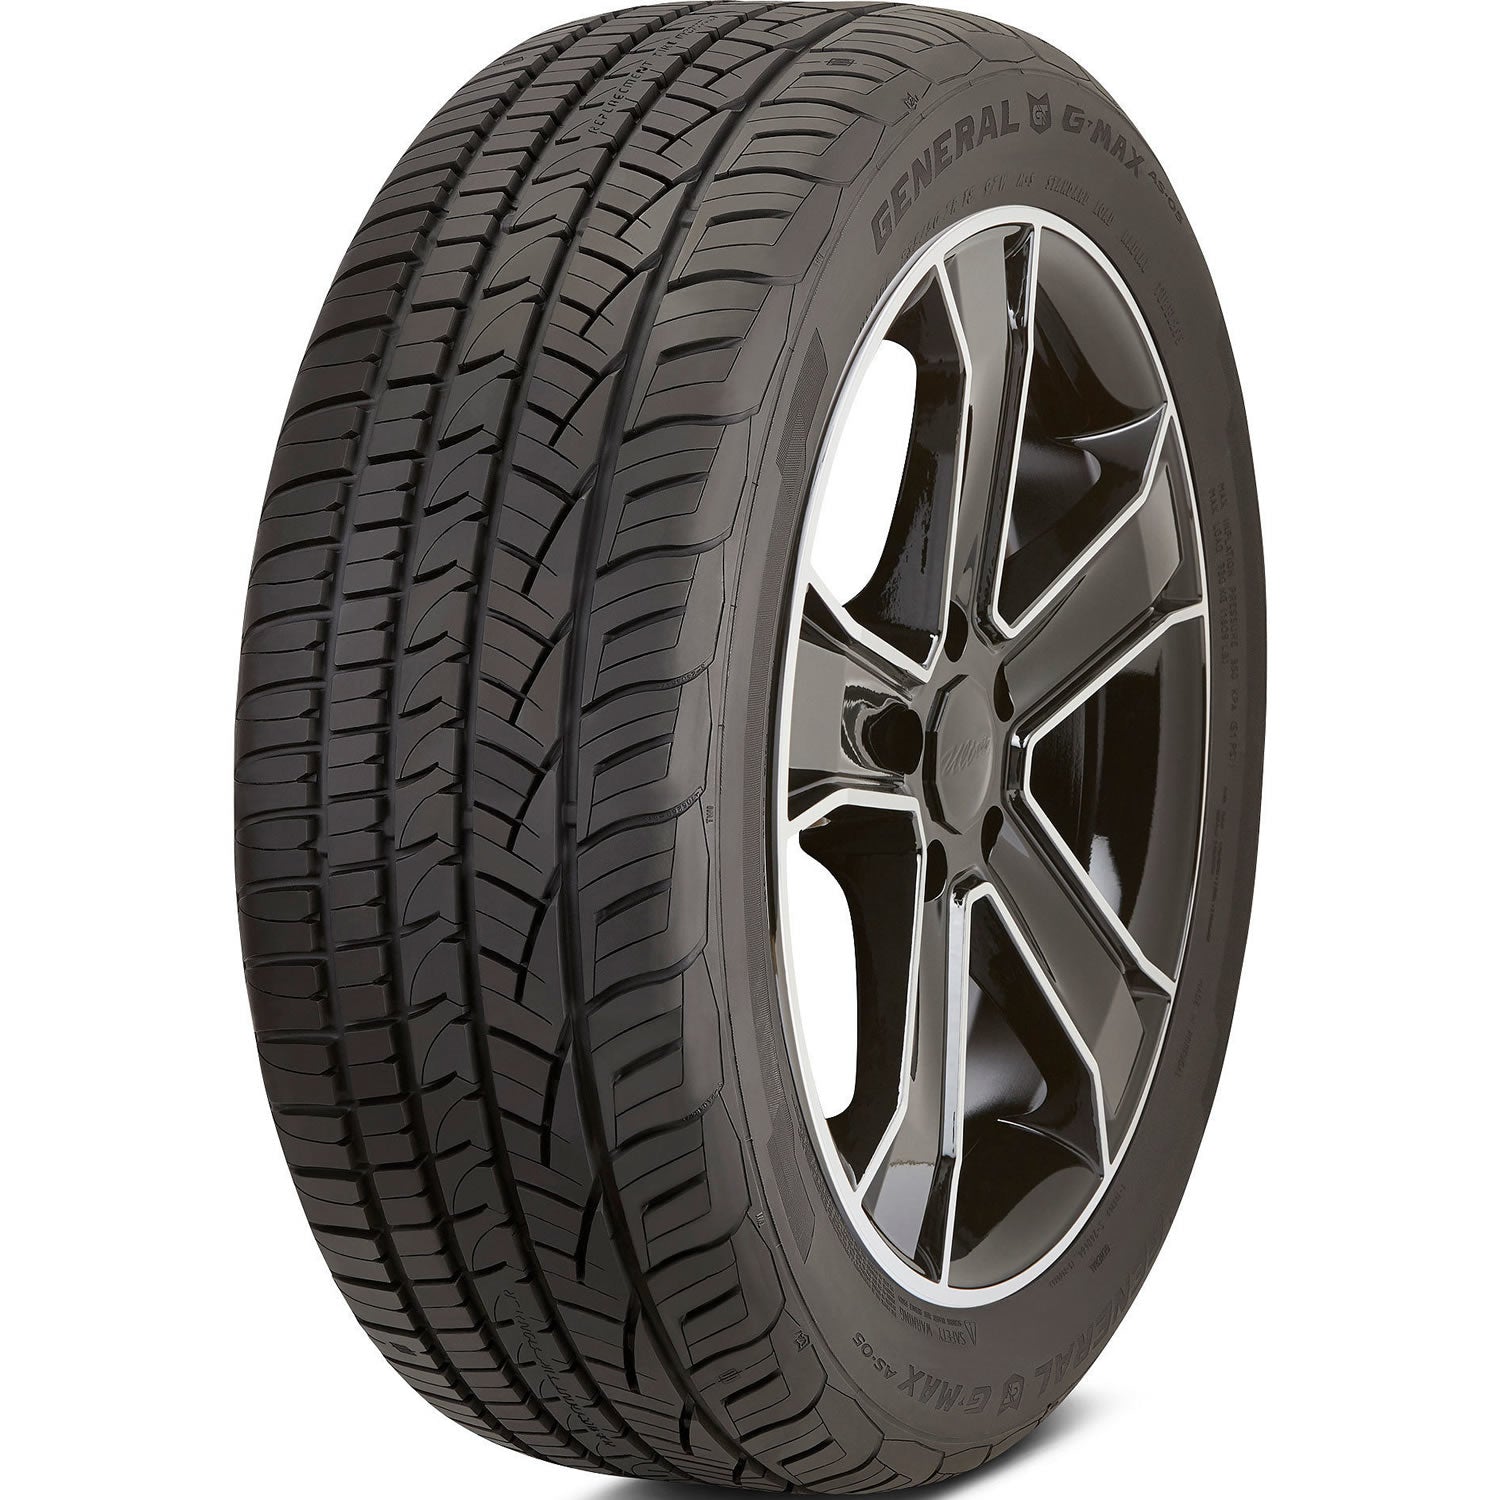 GENERAL G-MAX AS-05 275/40ZR18 (26.7X10.8R 18) Tires